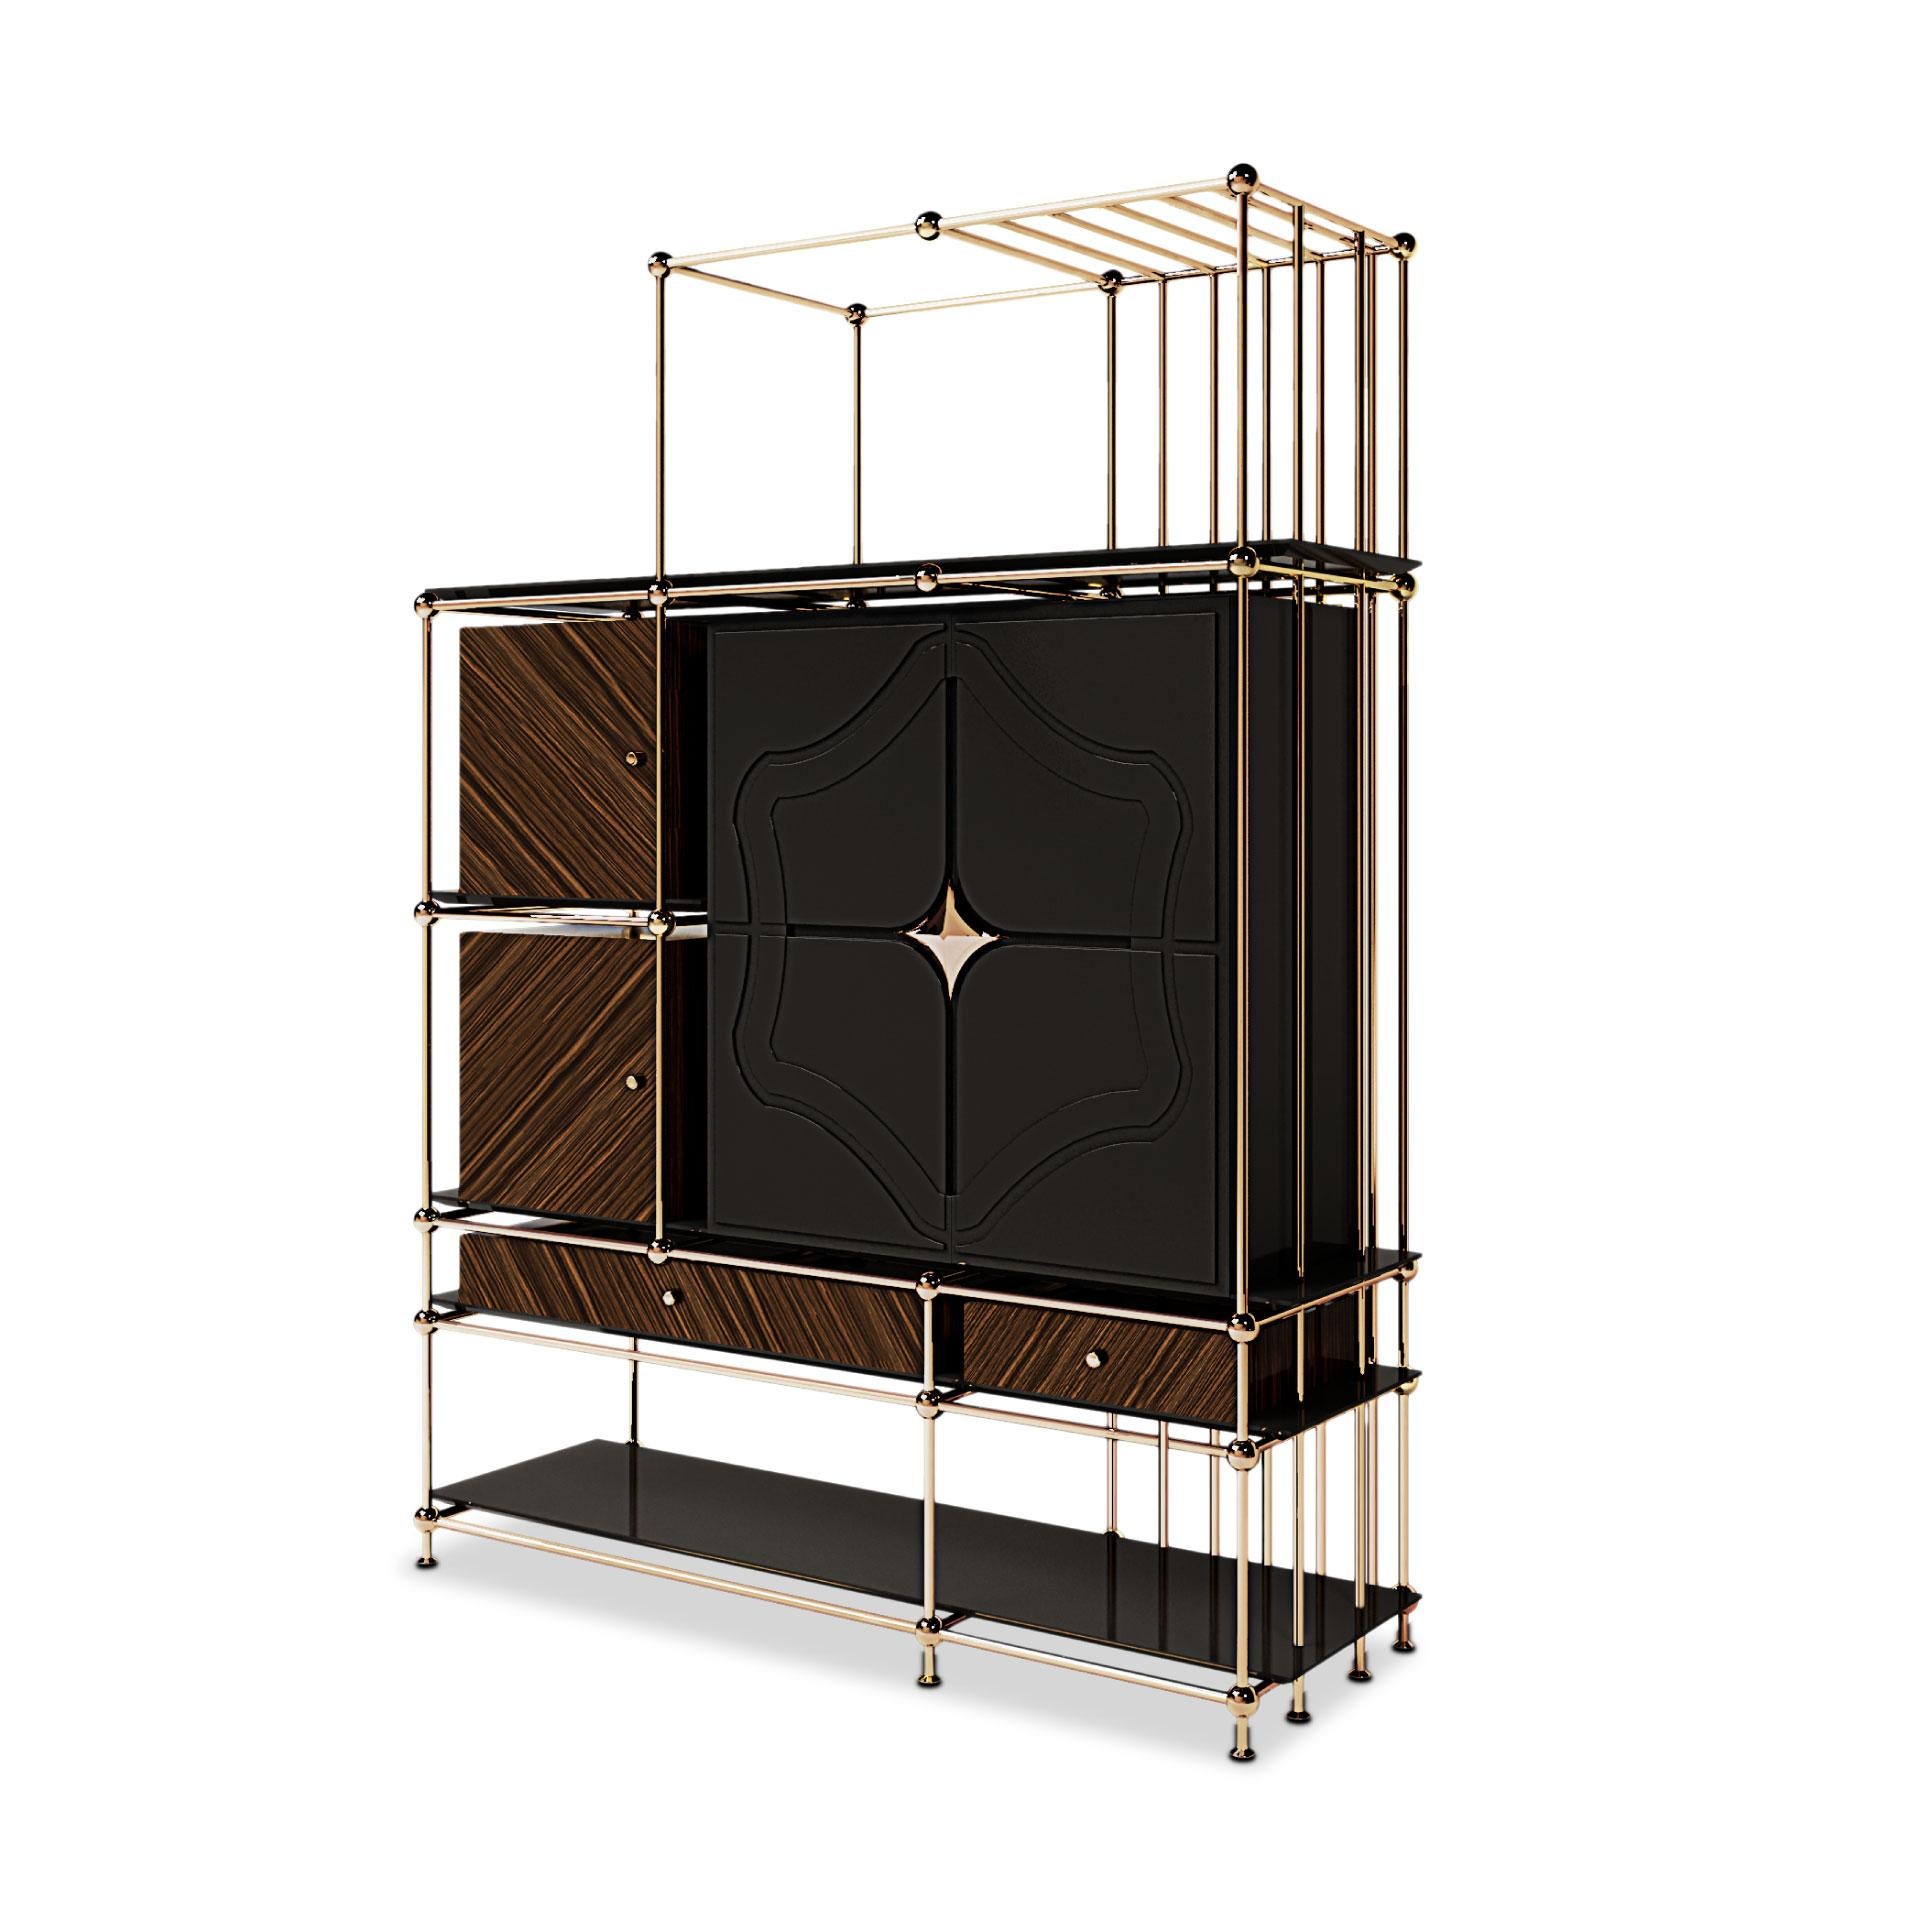 The structure is made of ironwood and lacquered wood with high gloss varnish and is completed with a frame made of polished brass tubes, embracing the interior of the contemporary furniture piece. The Vegas modern cabinet features 2 doors and 2